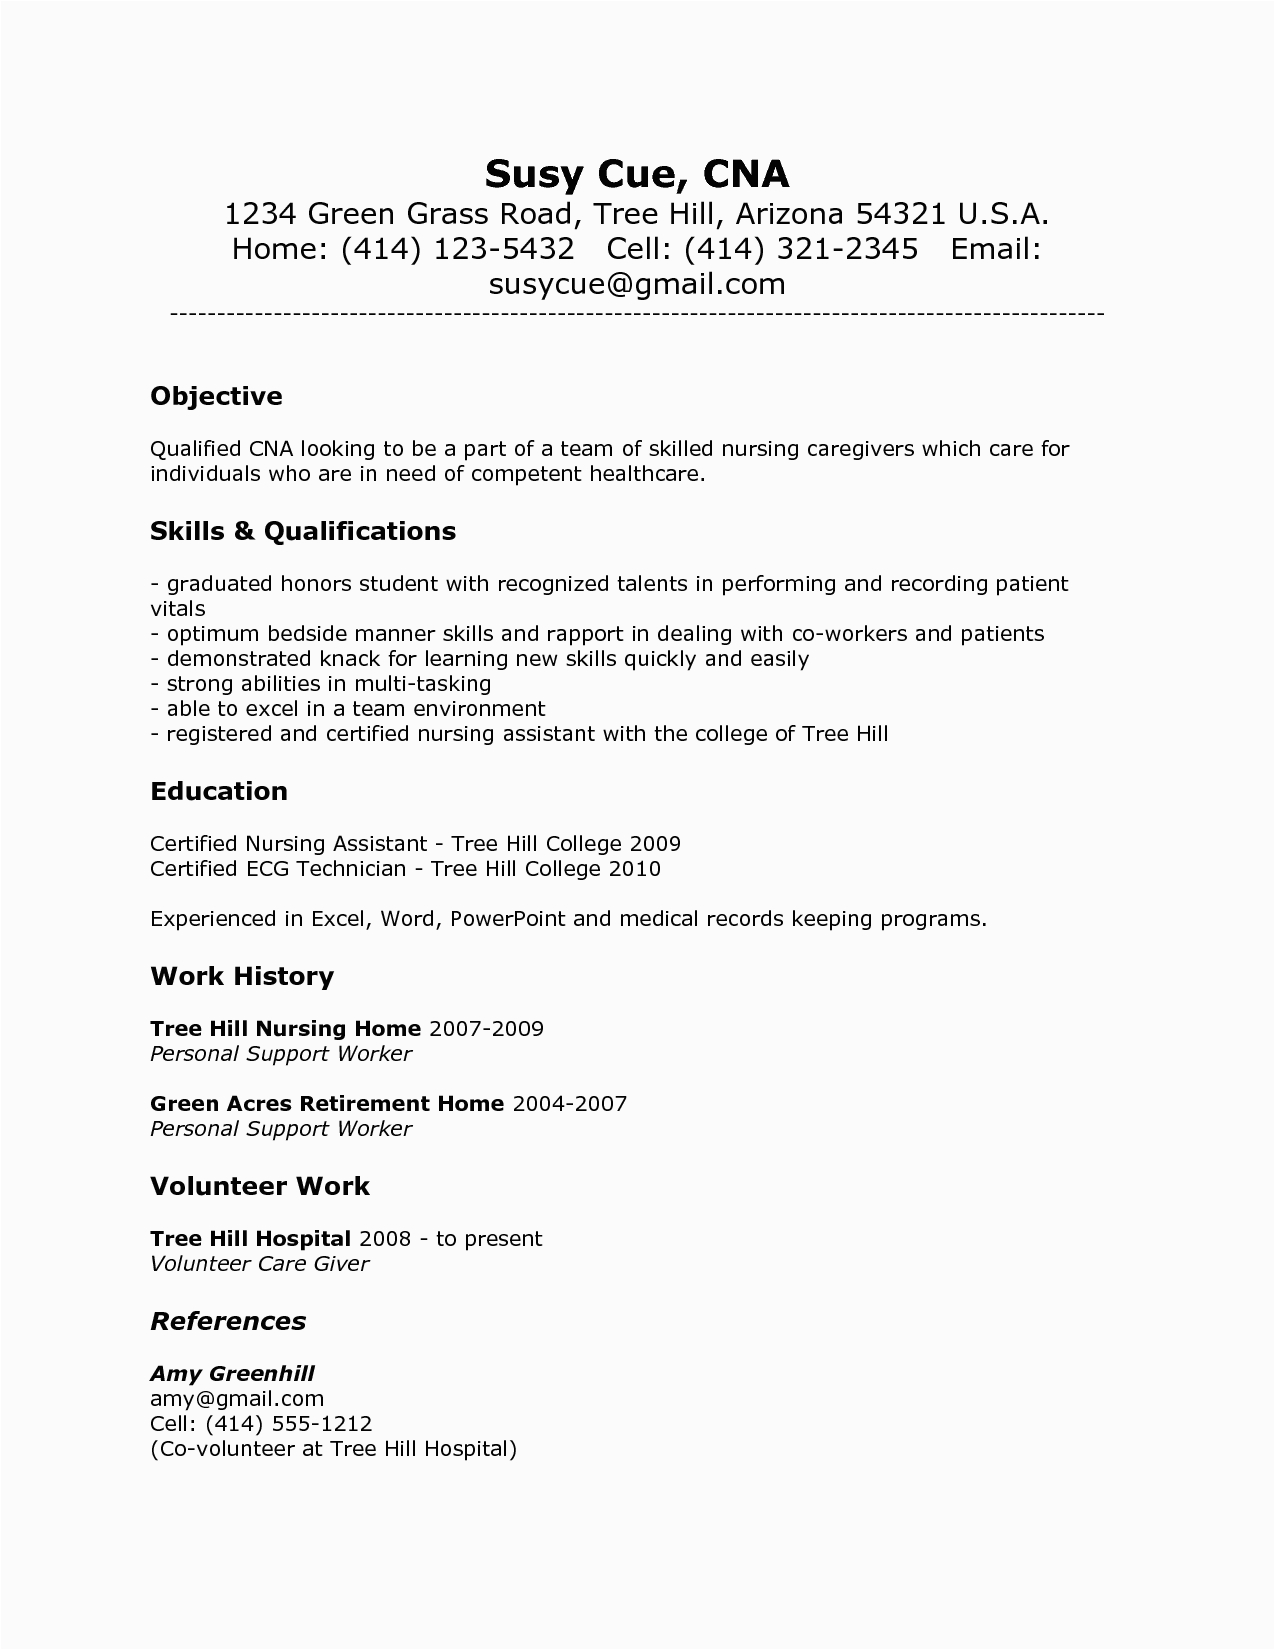 Resume Sample for Cna with No Experience Cna Resume Sample